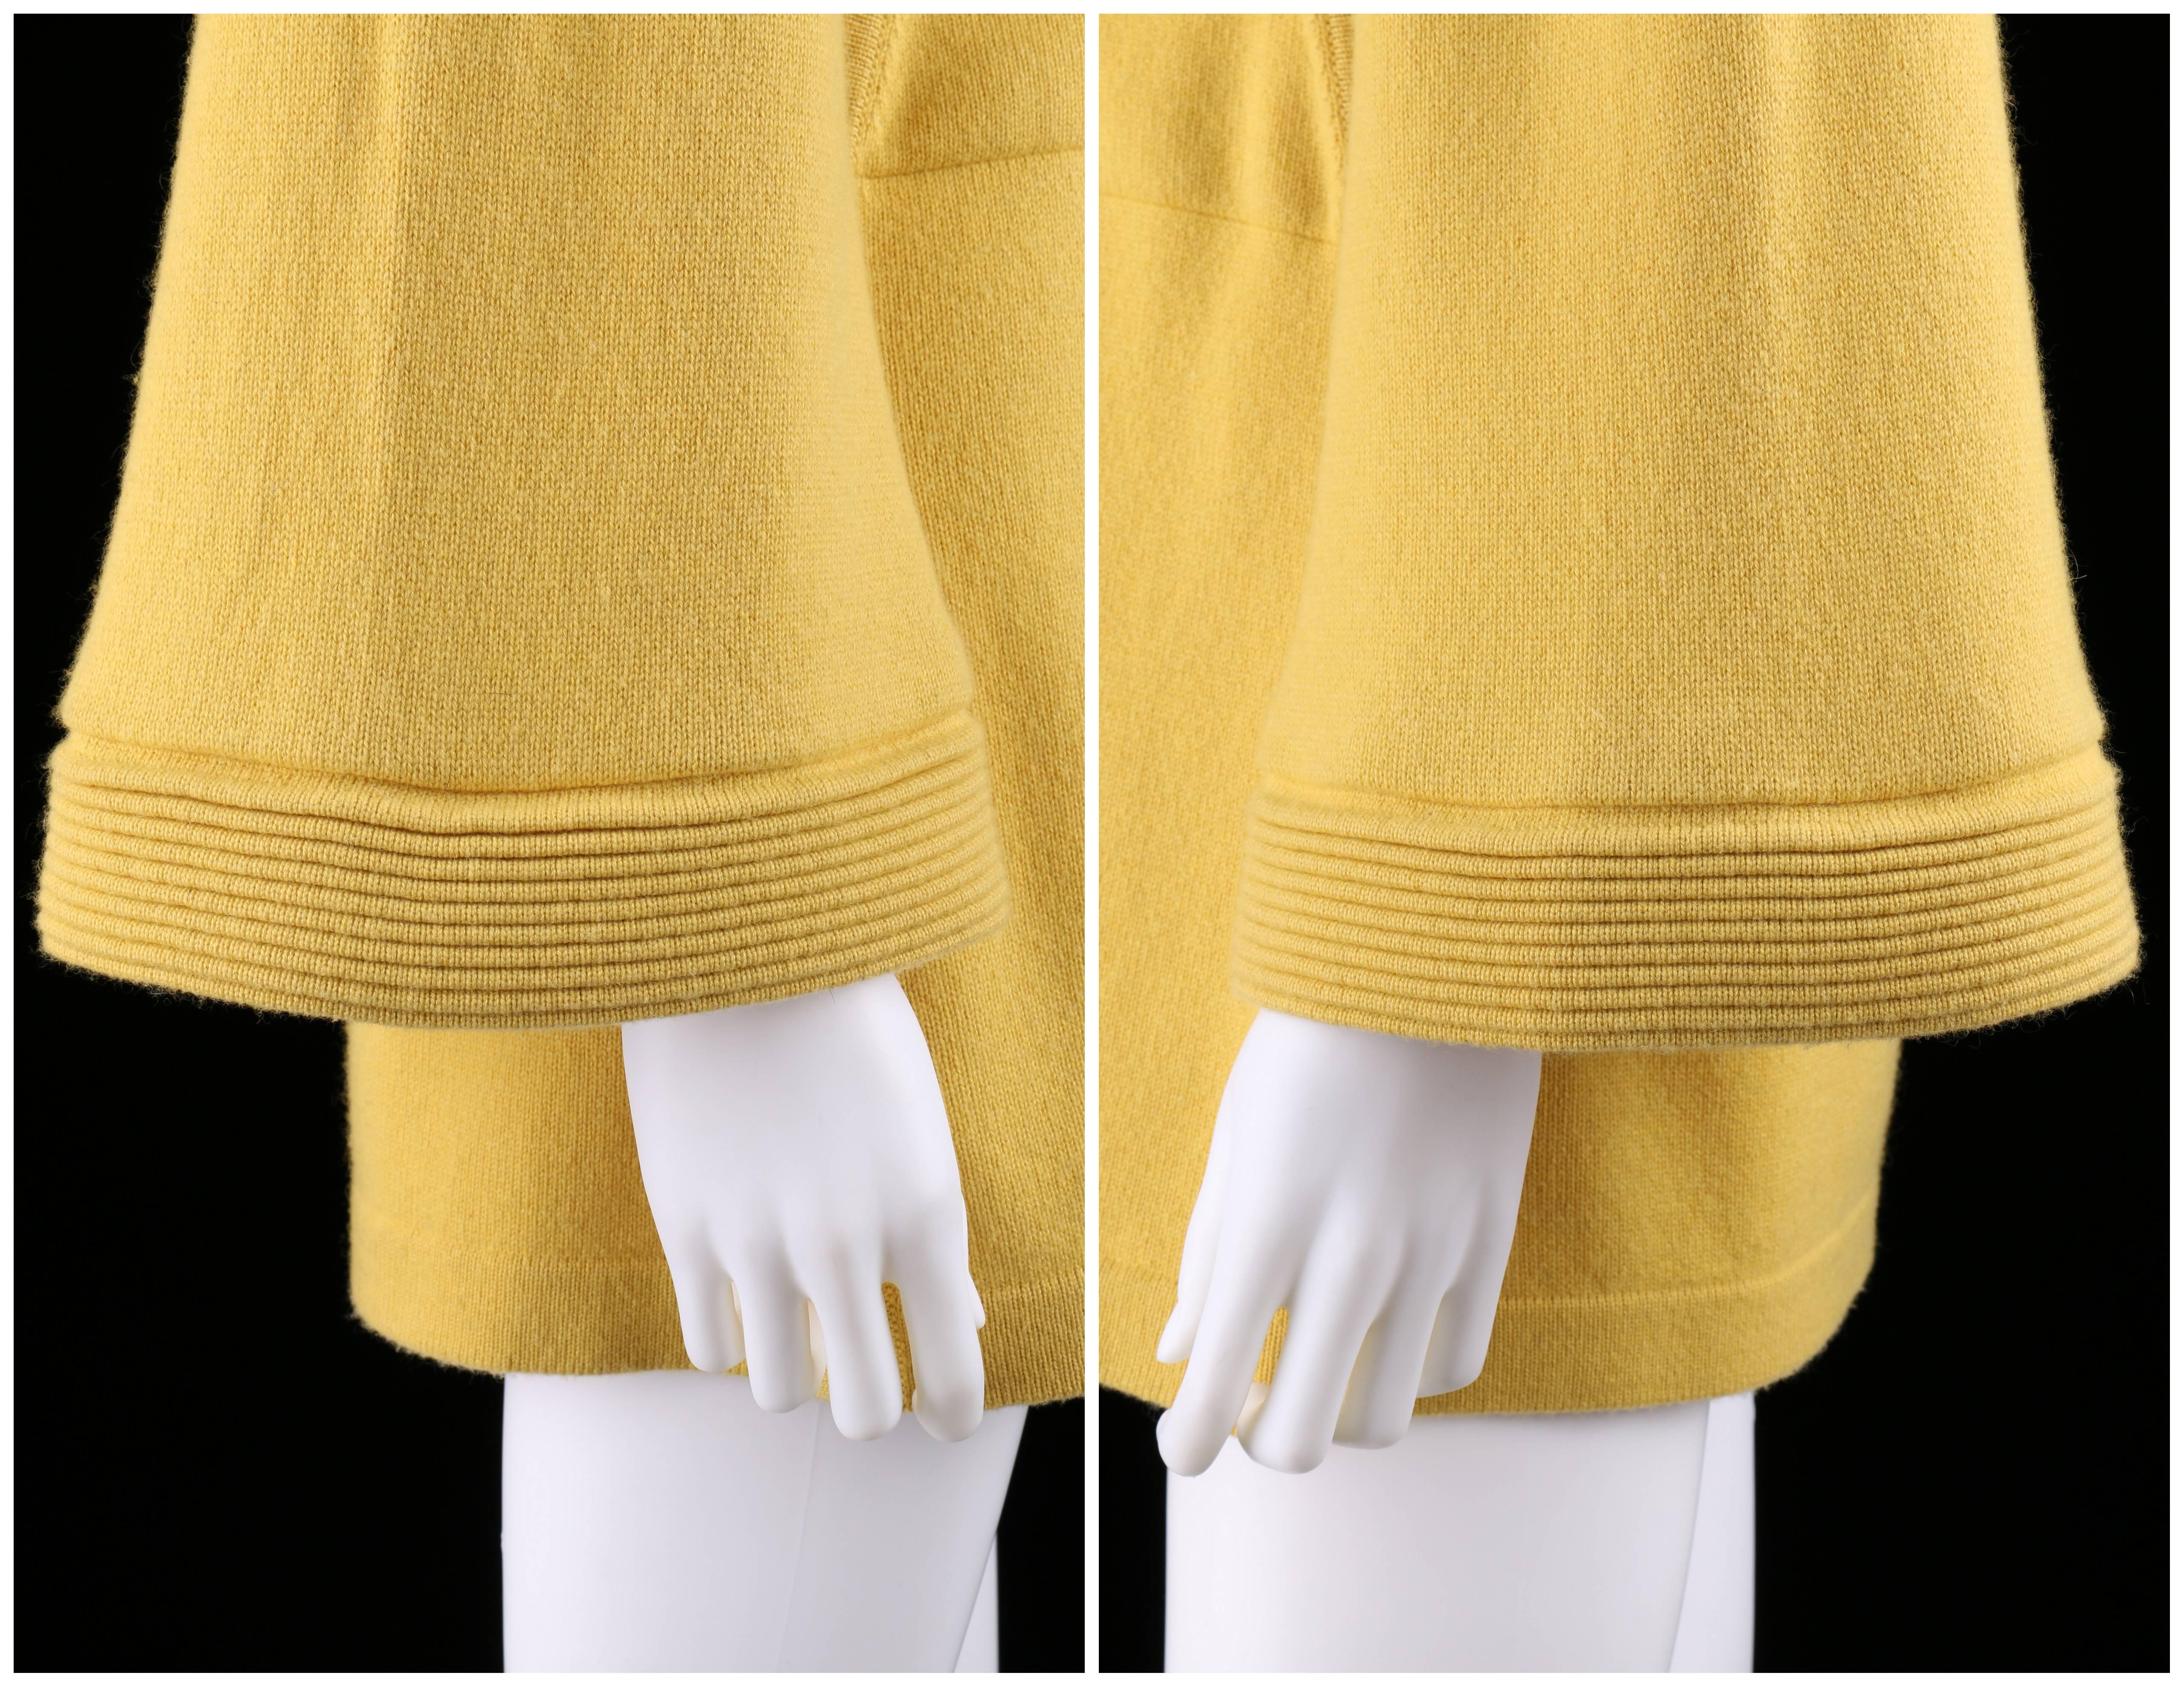 CHANEL PreFall 2010 Shanghai Collection Yellow Cashmere Tunic Knit Sweater Dress 1